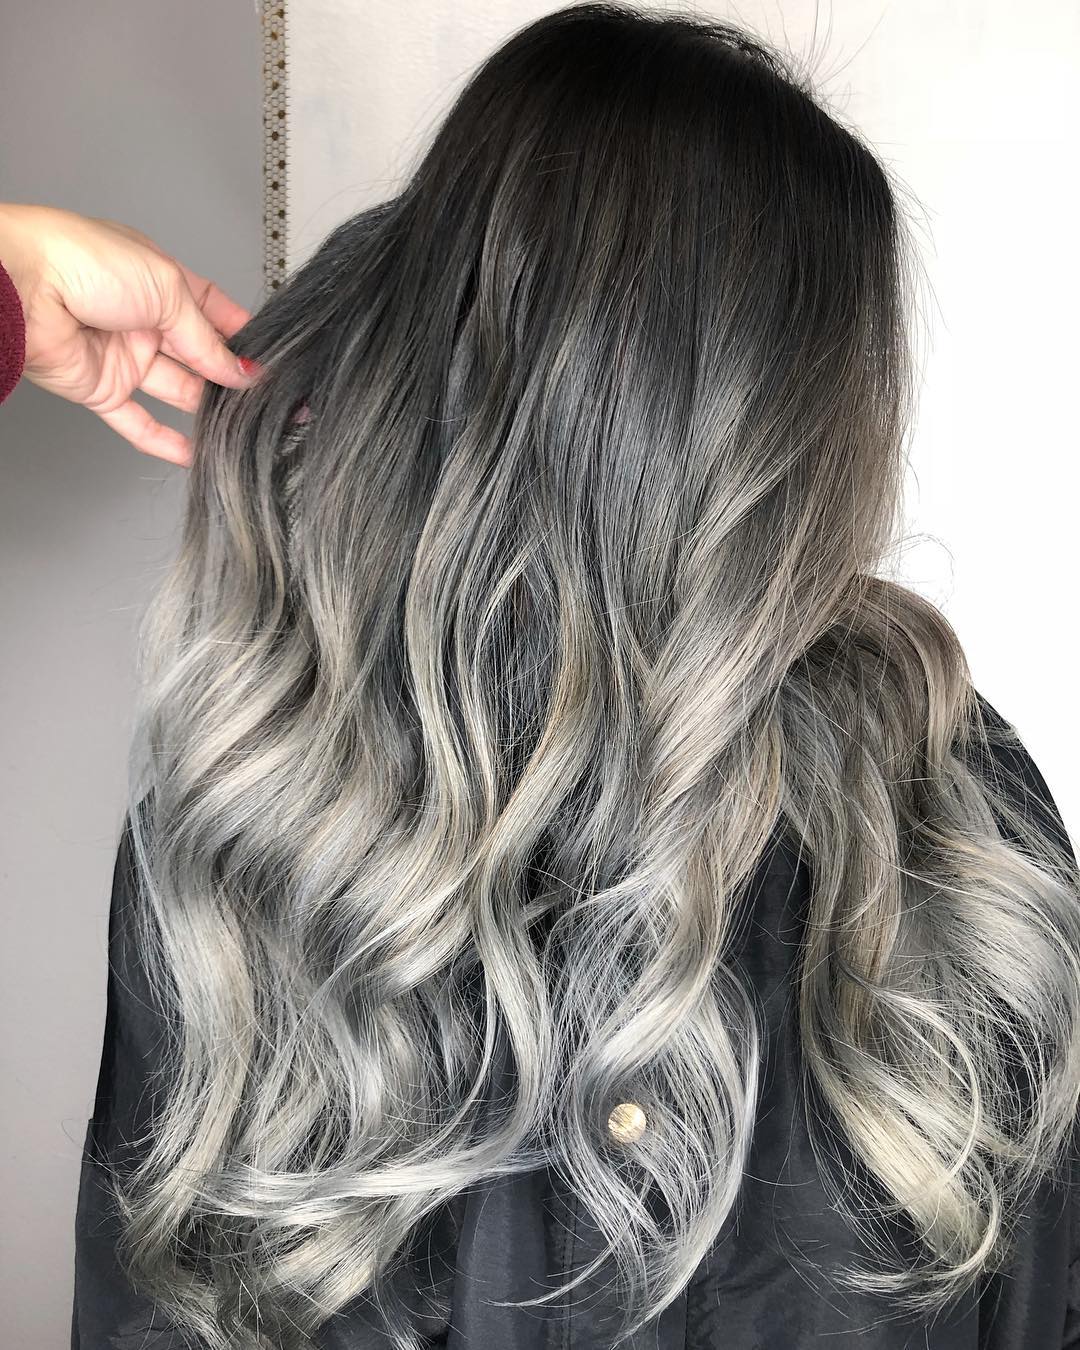 The Grey Ombre Hair Trend of 2023: 15 Hottest Examples